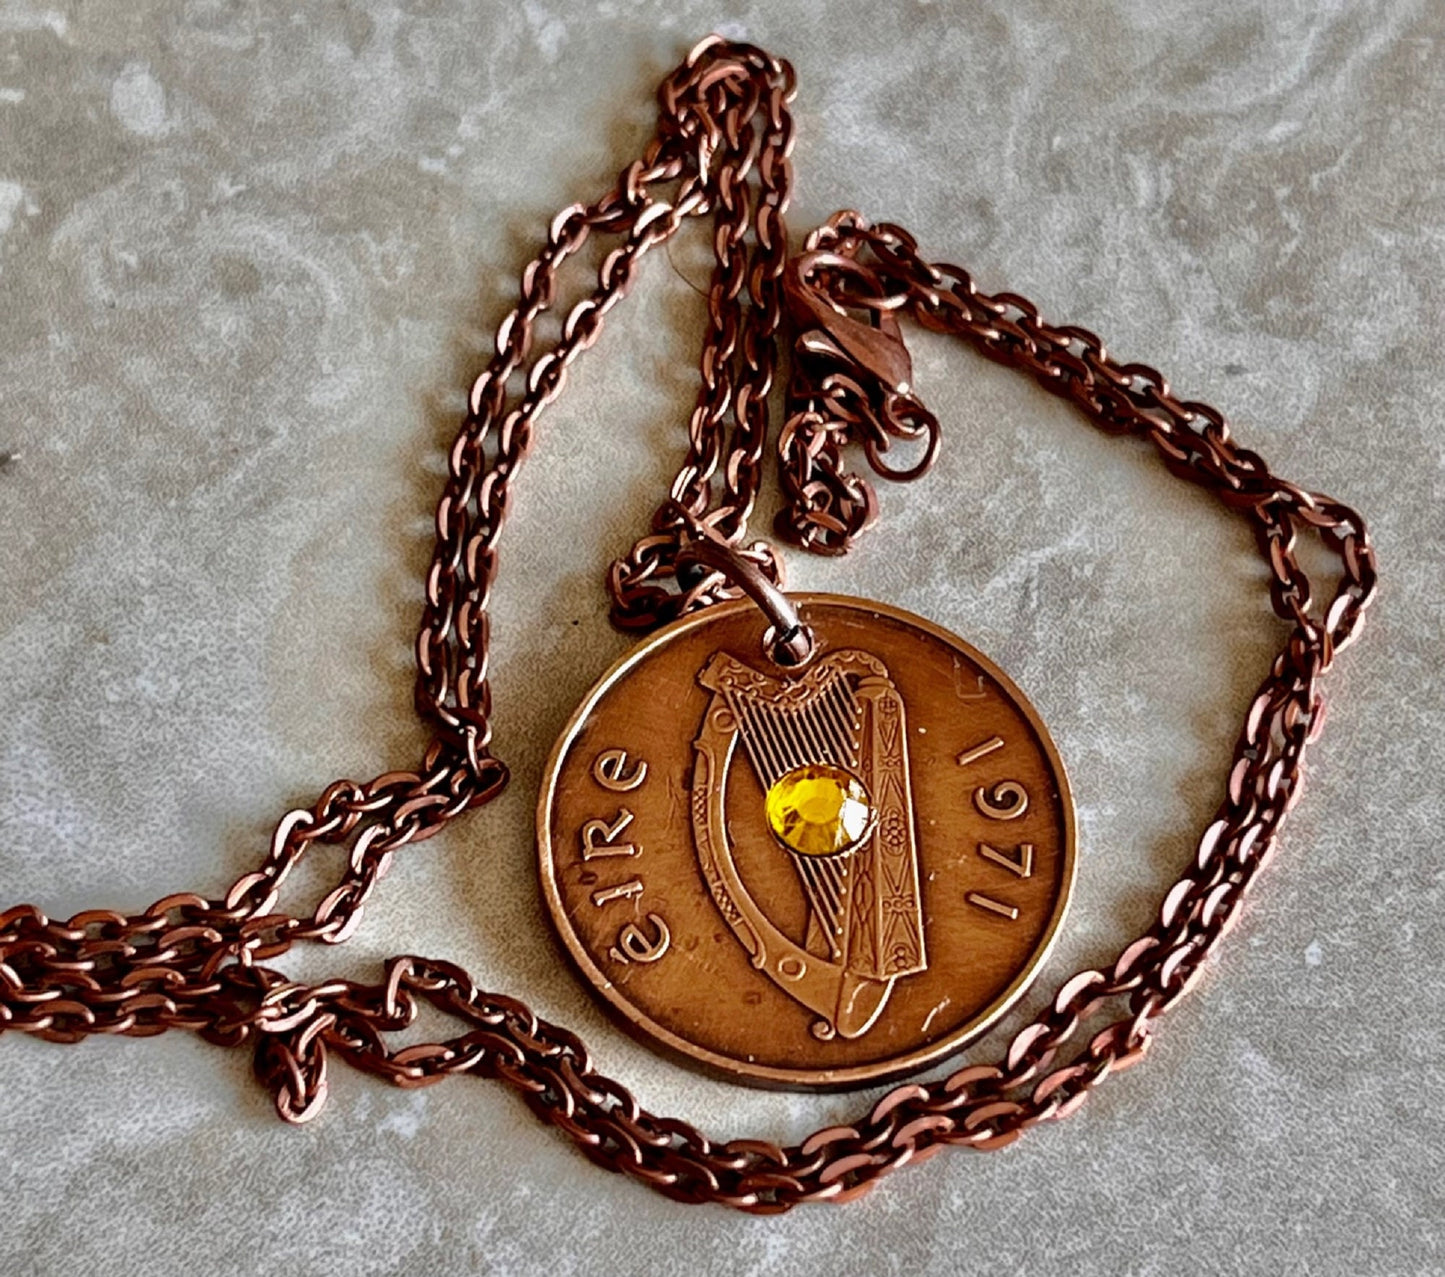 Ireland Coin Pendant 2 Pence Irish Harp Coin Necklace Rhinestone Gift For Friend Coin Charm Gift For Him, Her, Coin Collector, World Coins